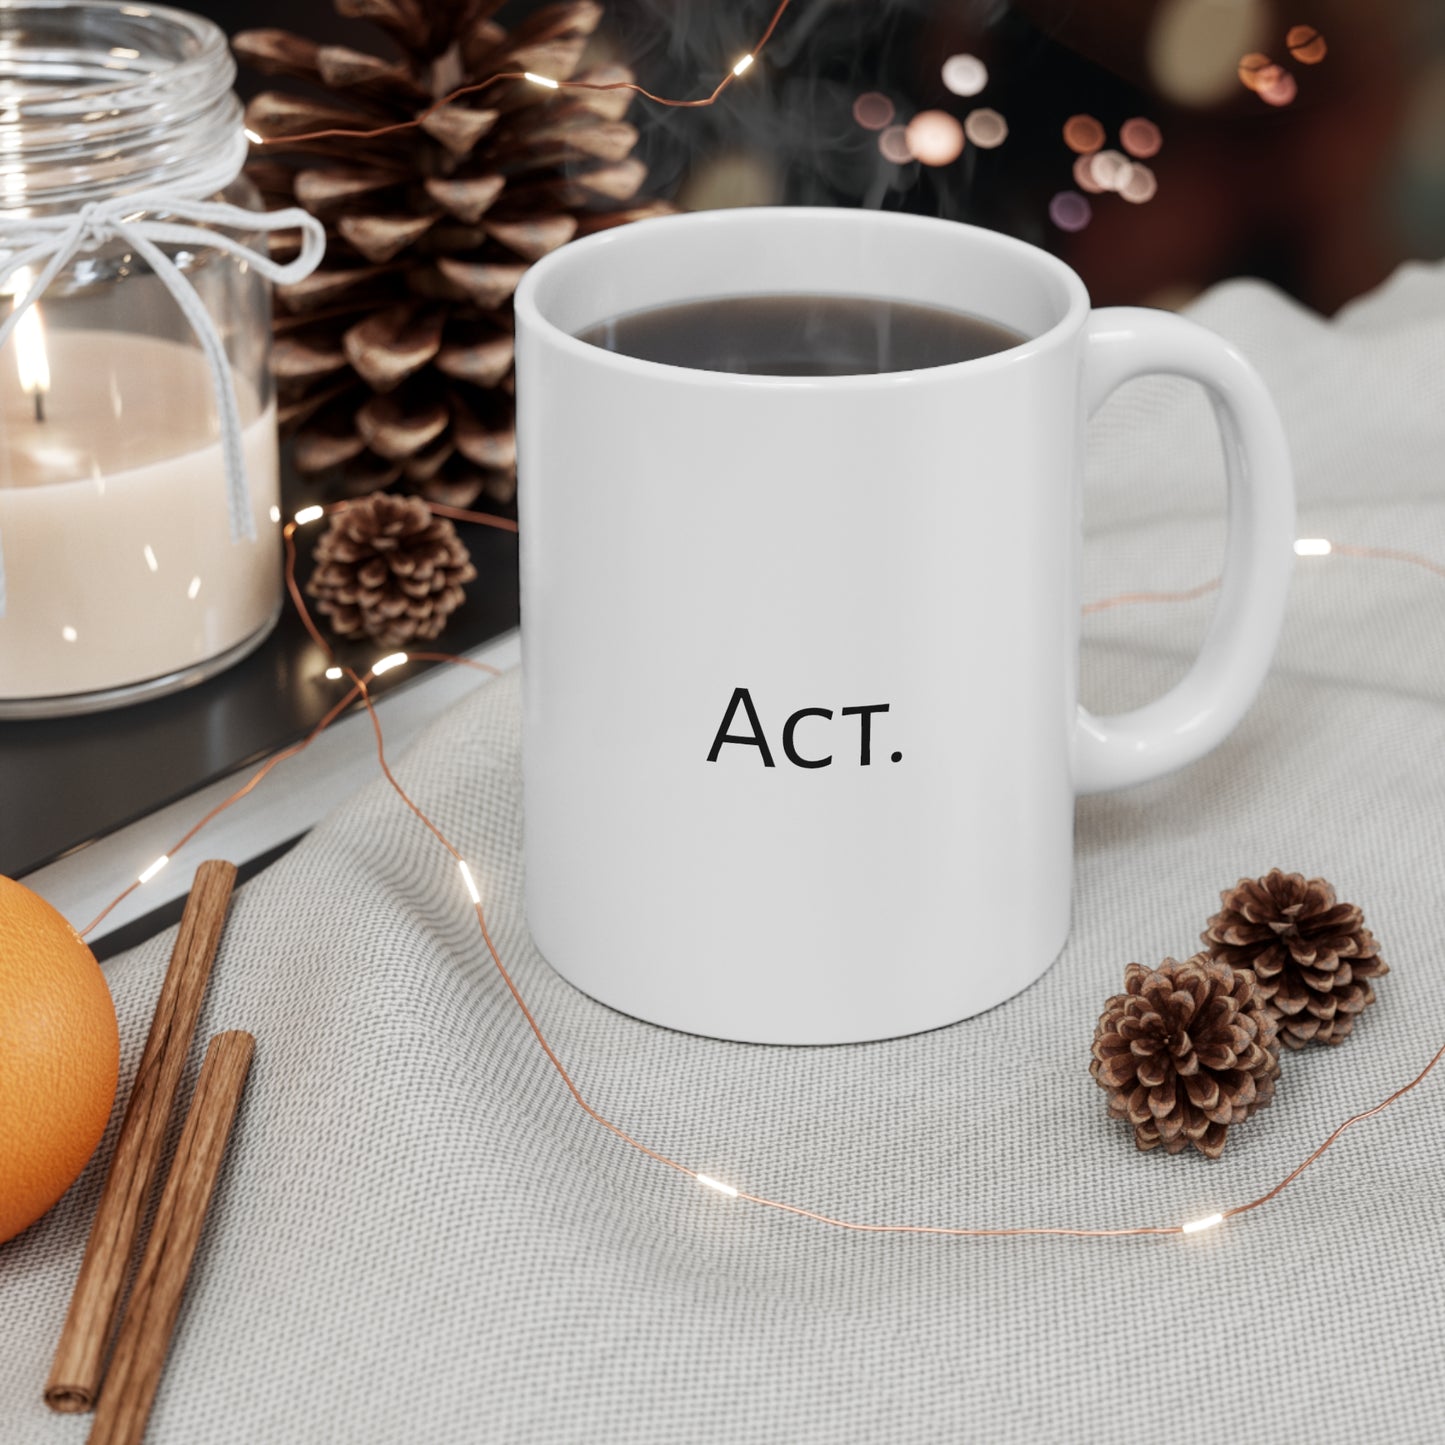 "Small acts transform the world." on one side and "Act." on another. Motivational Mug perfect for someone making a difference in the world one day at a time, one act of kindness at a time.